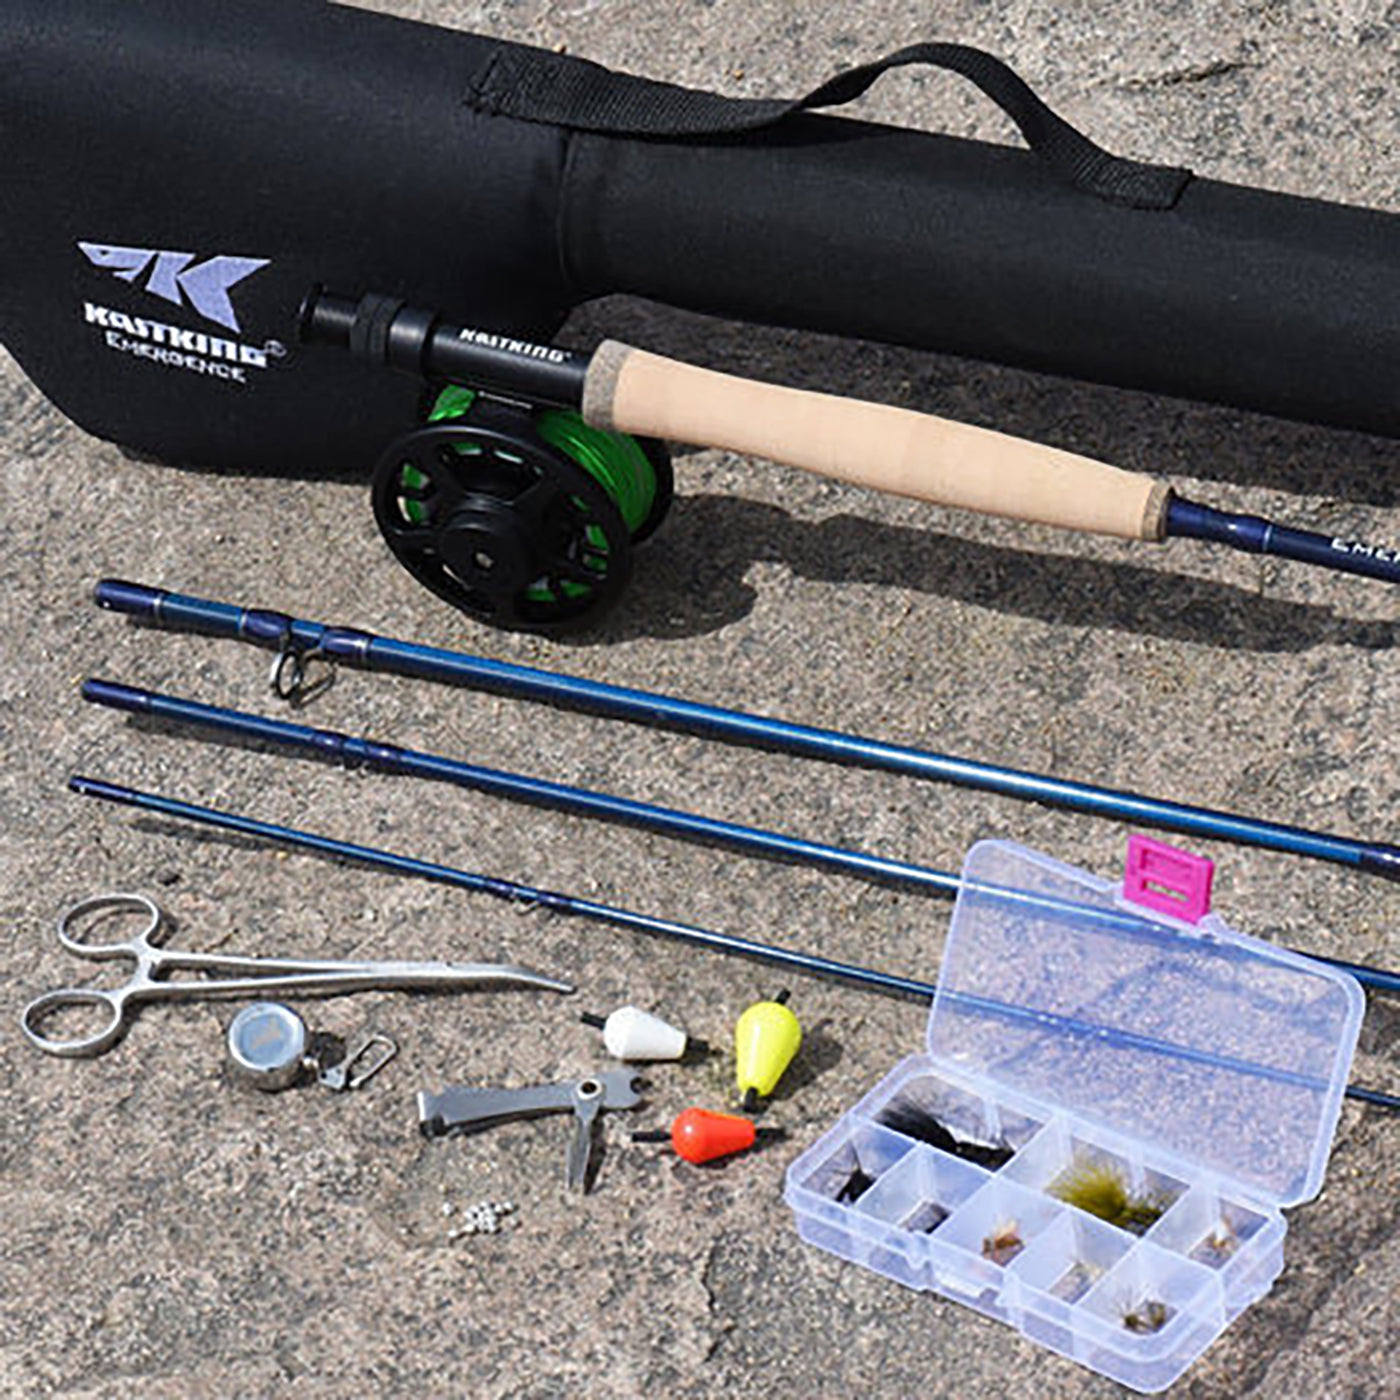 The KastKing Emergence combo in a 5 weight makes the perfect bluegill fishing gear